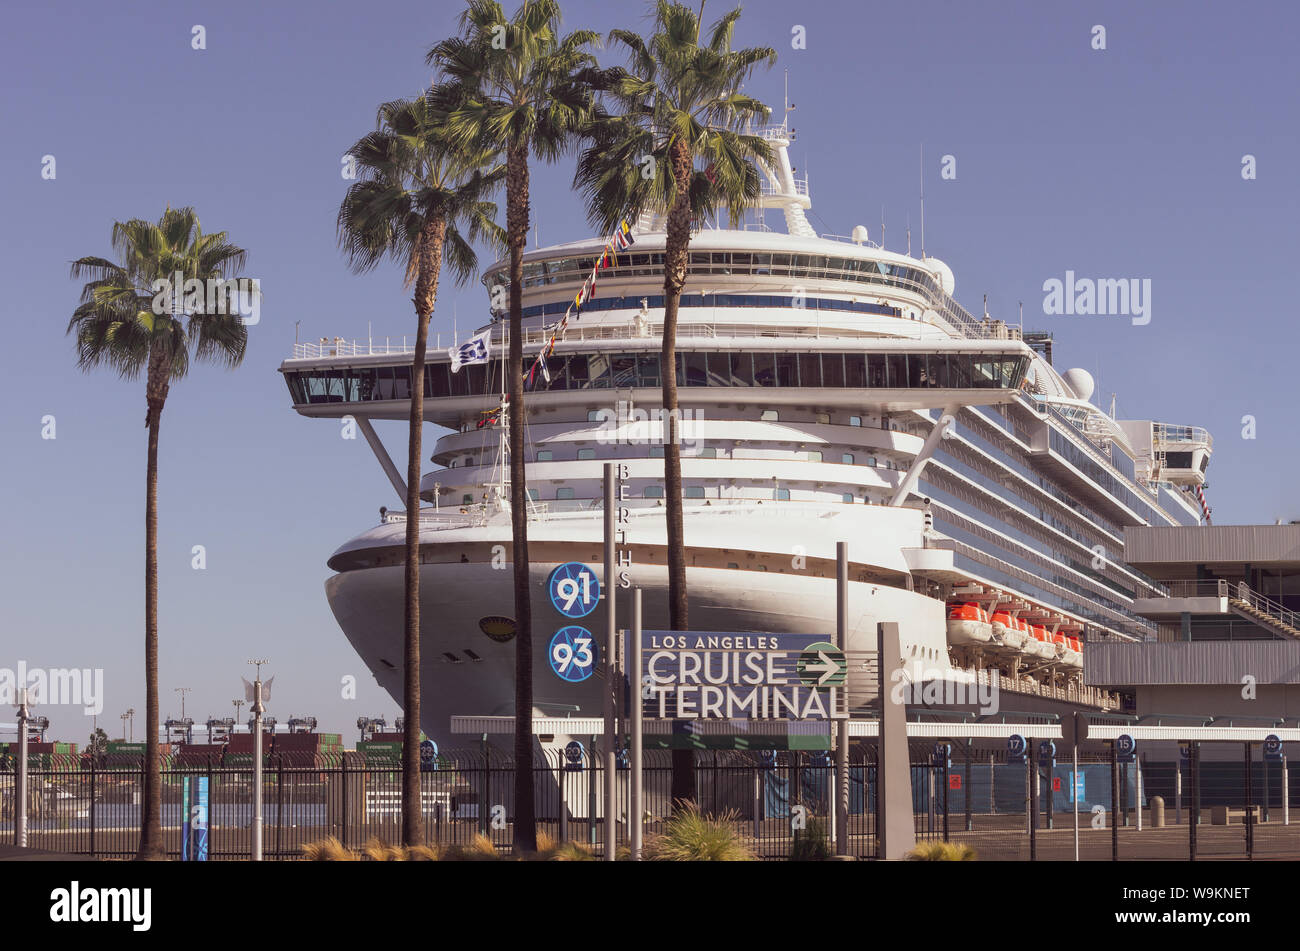 View of a cruise ship at the Los Angeles Cruise Terminal in the Port of